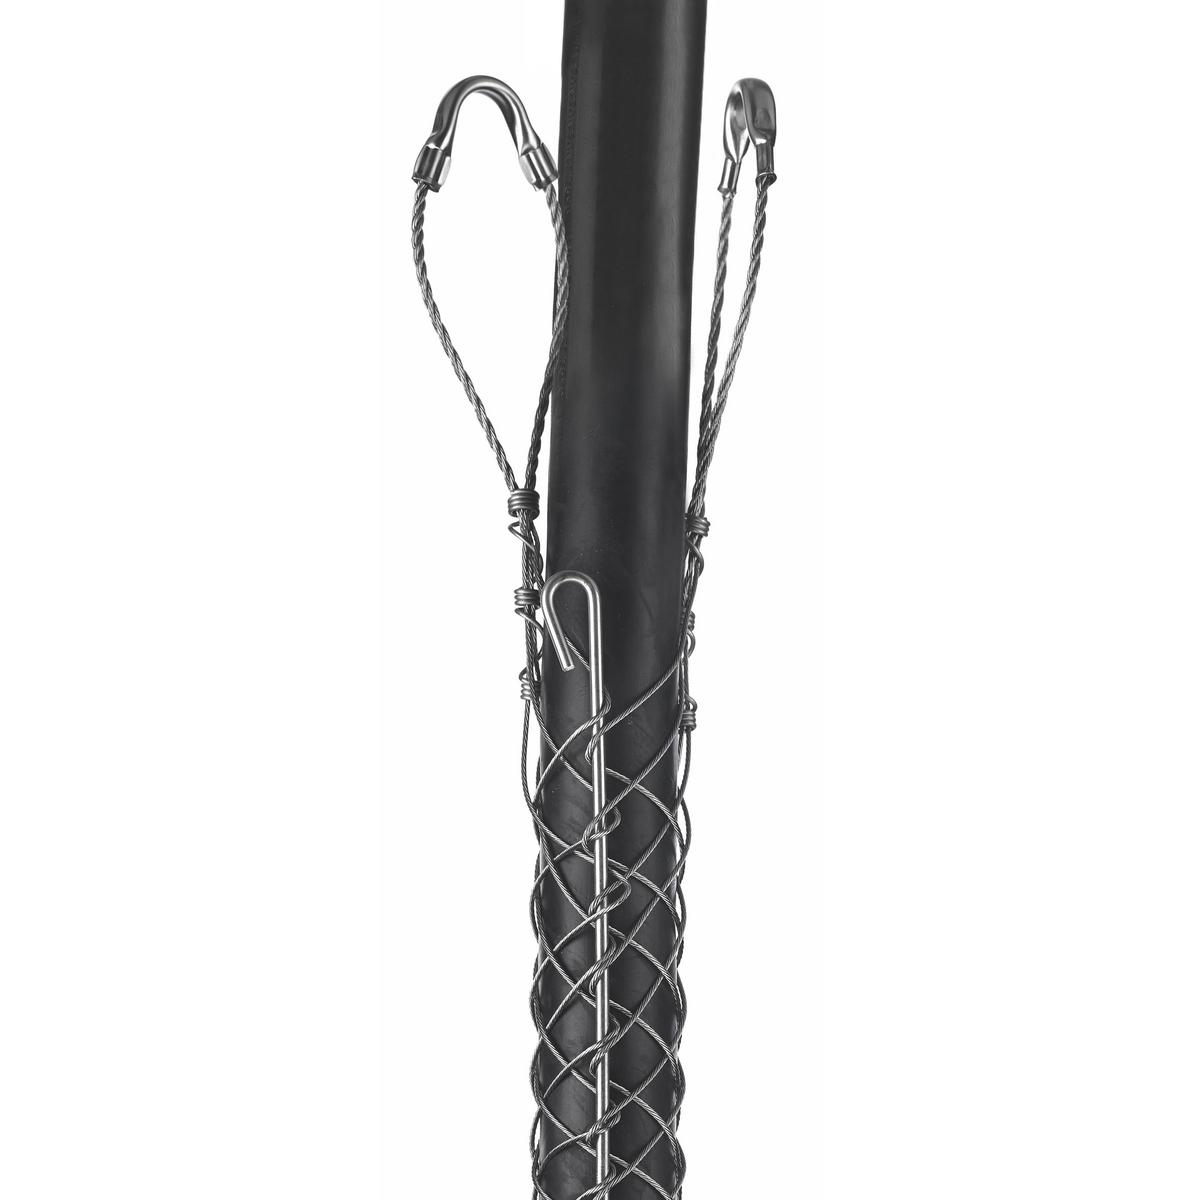 Hubbell 02403005 Support Grips, Double Eye, Single Weave, Split Mesh, Rod Closing, Stainless Steel, 1.00-1.24"  ; Double eye ; Strand equalizers position wires for equal loading throughout grip length ; Eye assemblies provide eye reinforcement at support hardware ; Split 